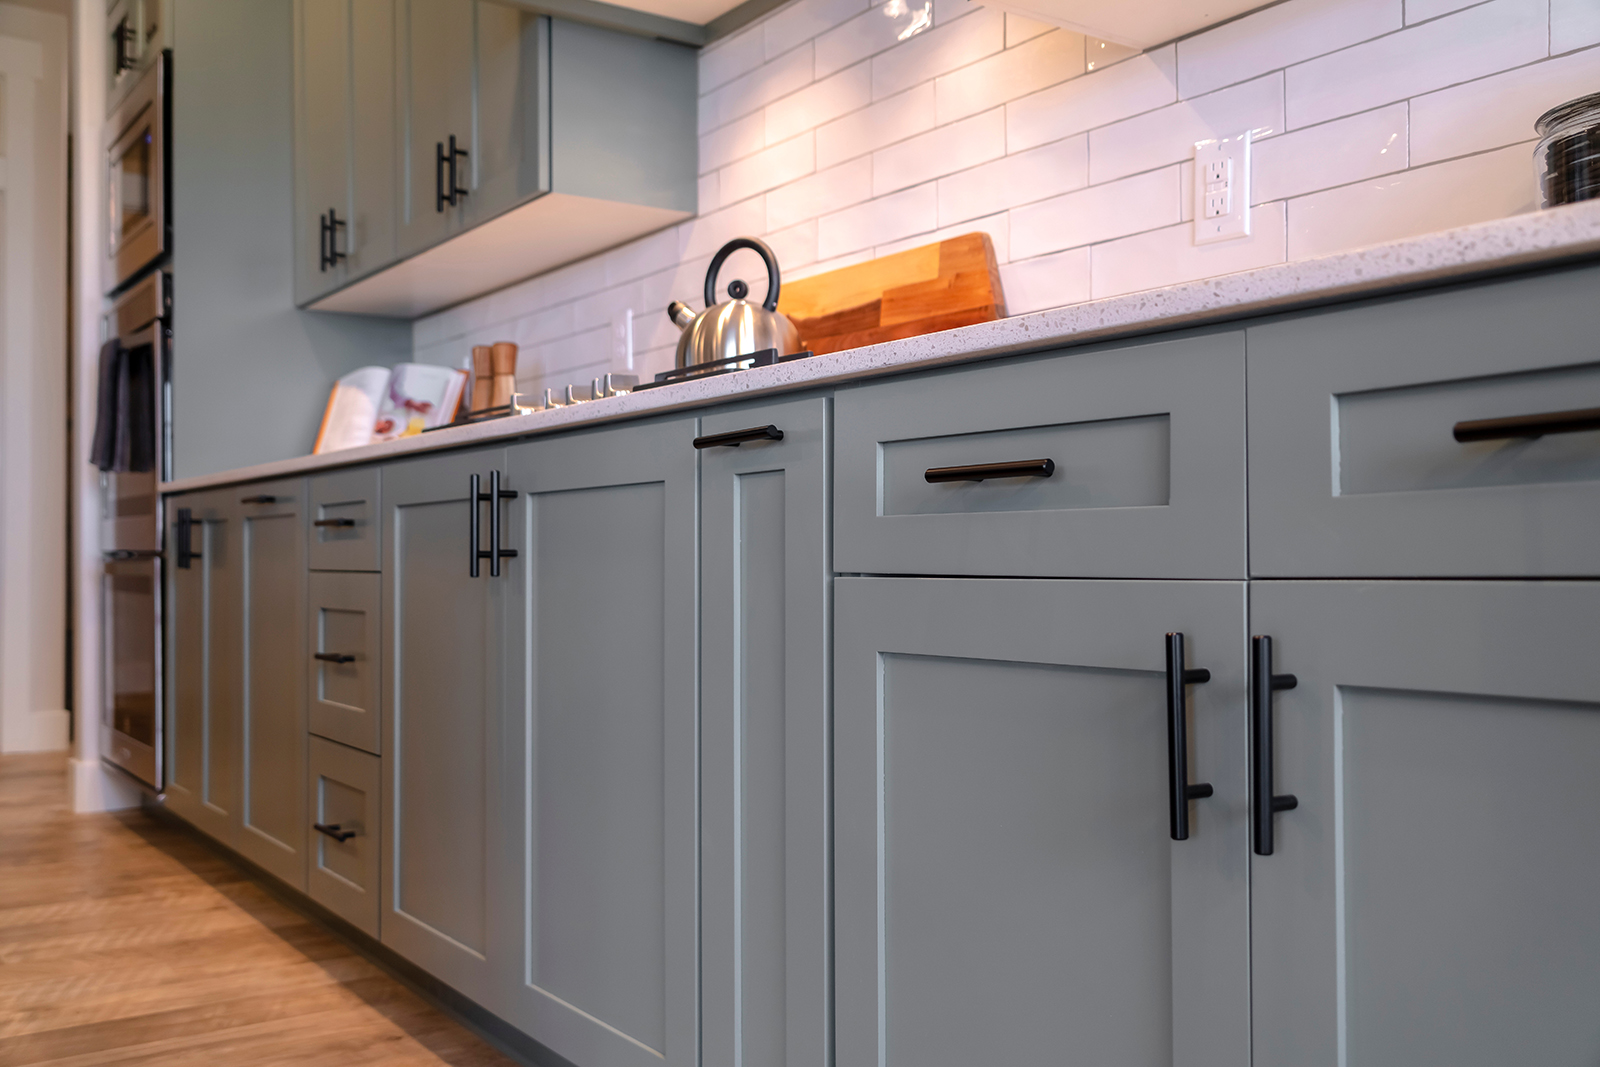 New house? Time for New Cabinets! A Guide To The Perfect Cabinet For You